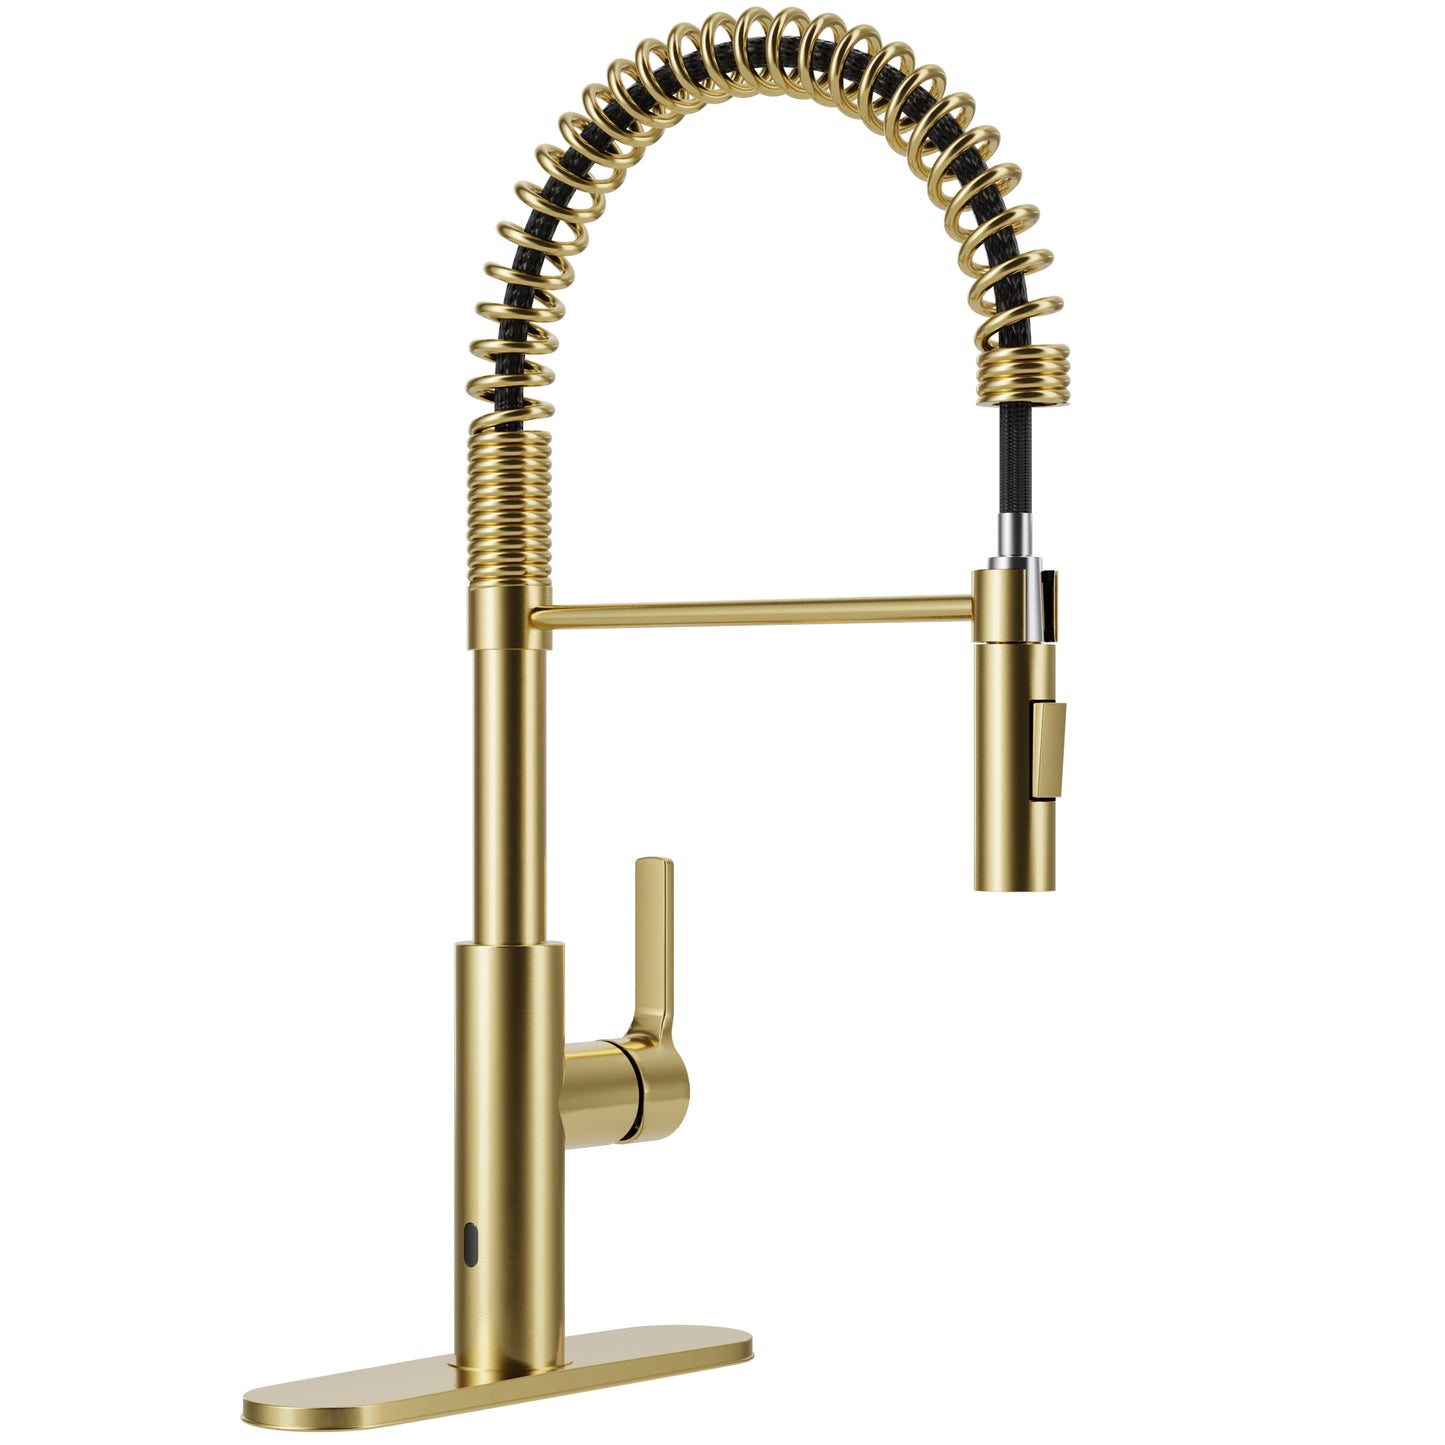 KF-AZ303BG - Ola Hands Free Touchless 1-Handle Pull-Down Sprayer Kitchen Faucet with Motion Sense and Fan Sprayer in Brushed Gold